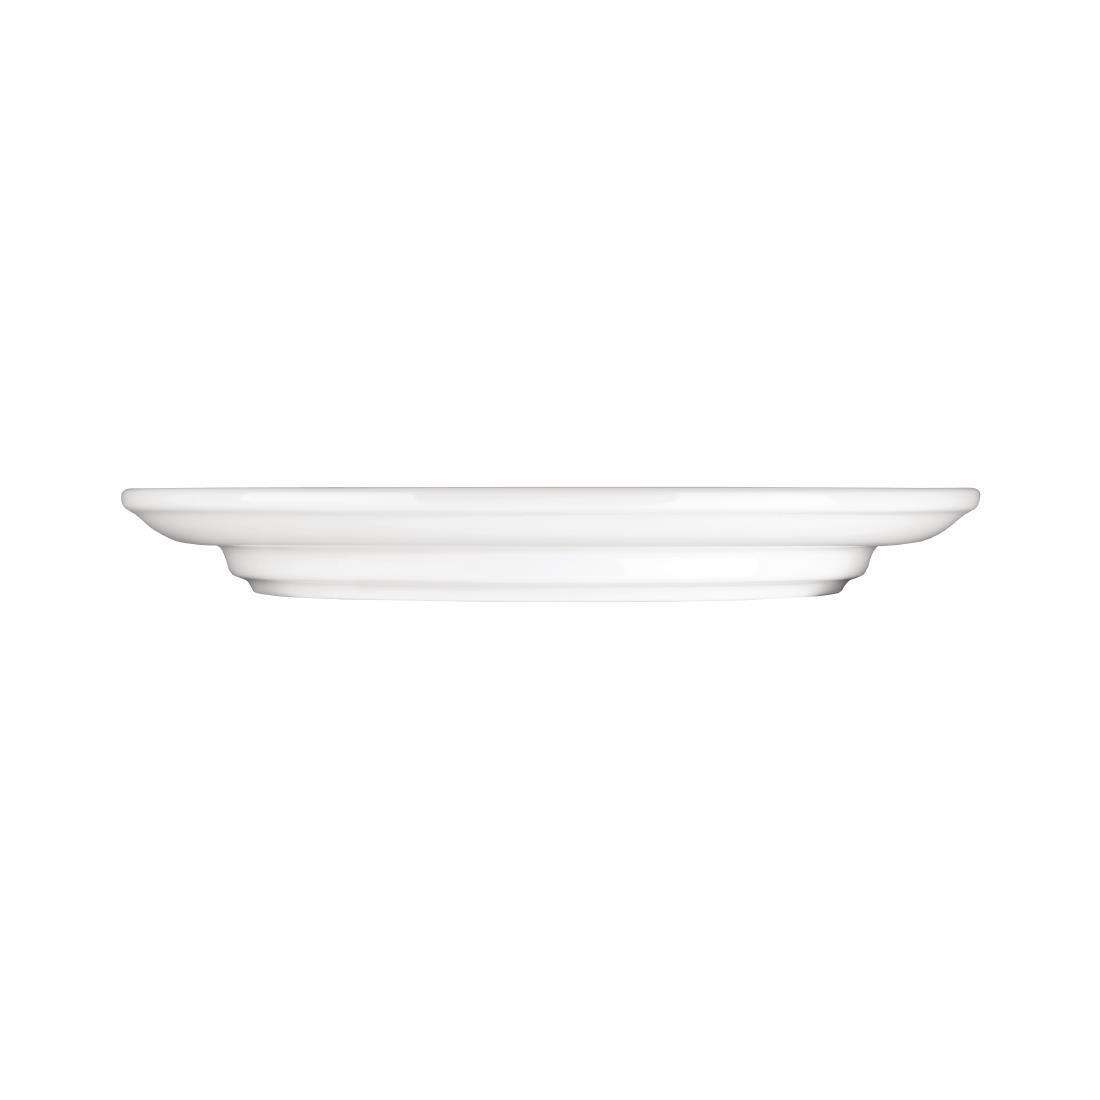 Olympia Heritage Raised Rim Plates White 203mm (Pack of 4) - DW152  - 3